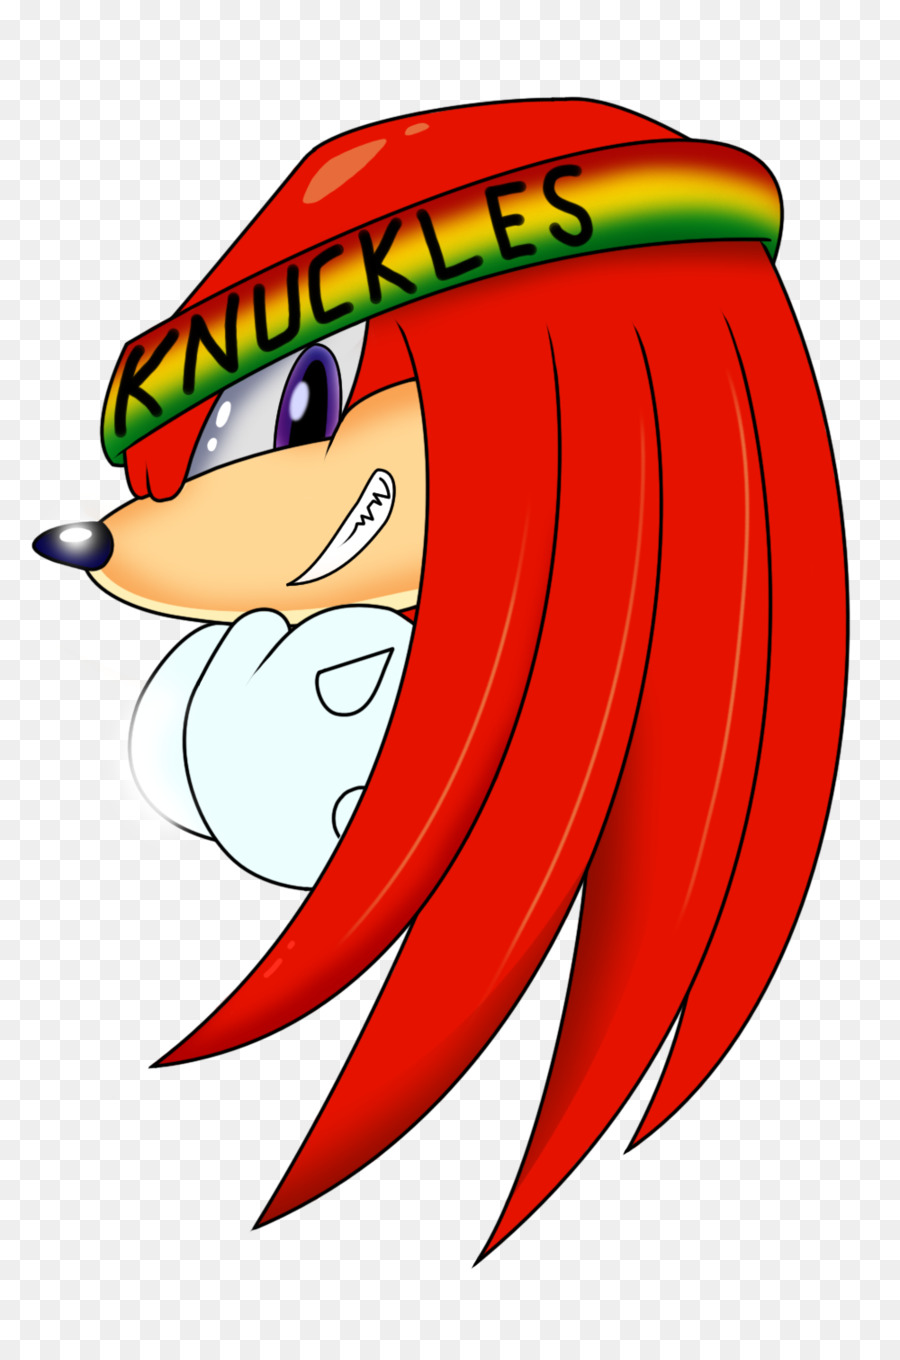 Knuckles The Echidna，Equidna PNG